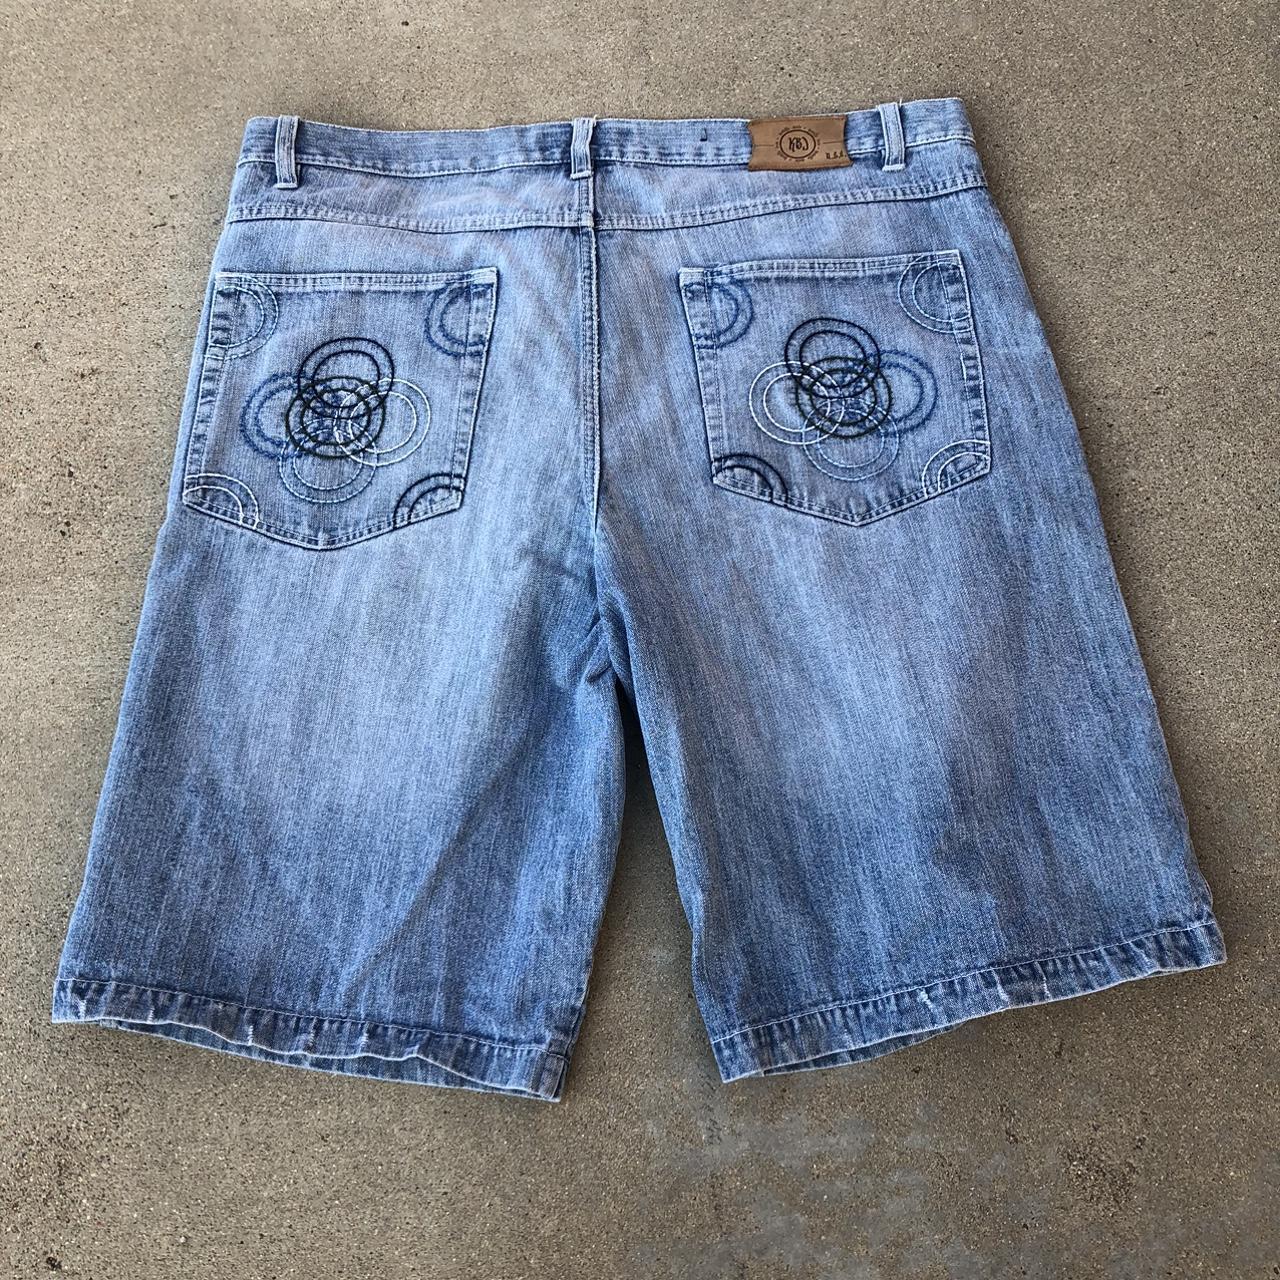 VERY OPEN TO OFFERS!! Baggy embroidered jorts w nice... - Depop